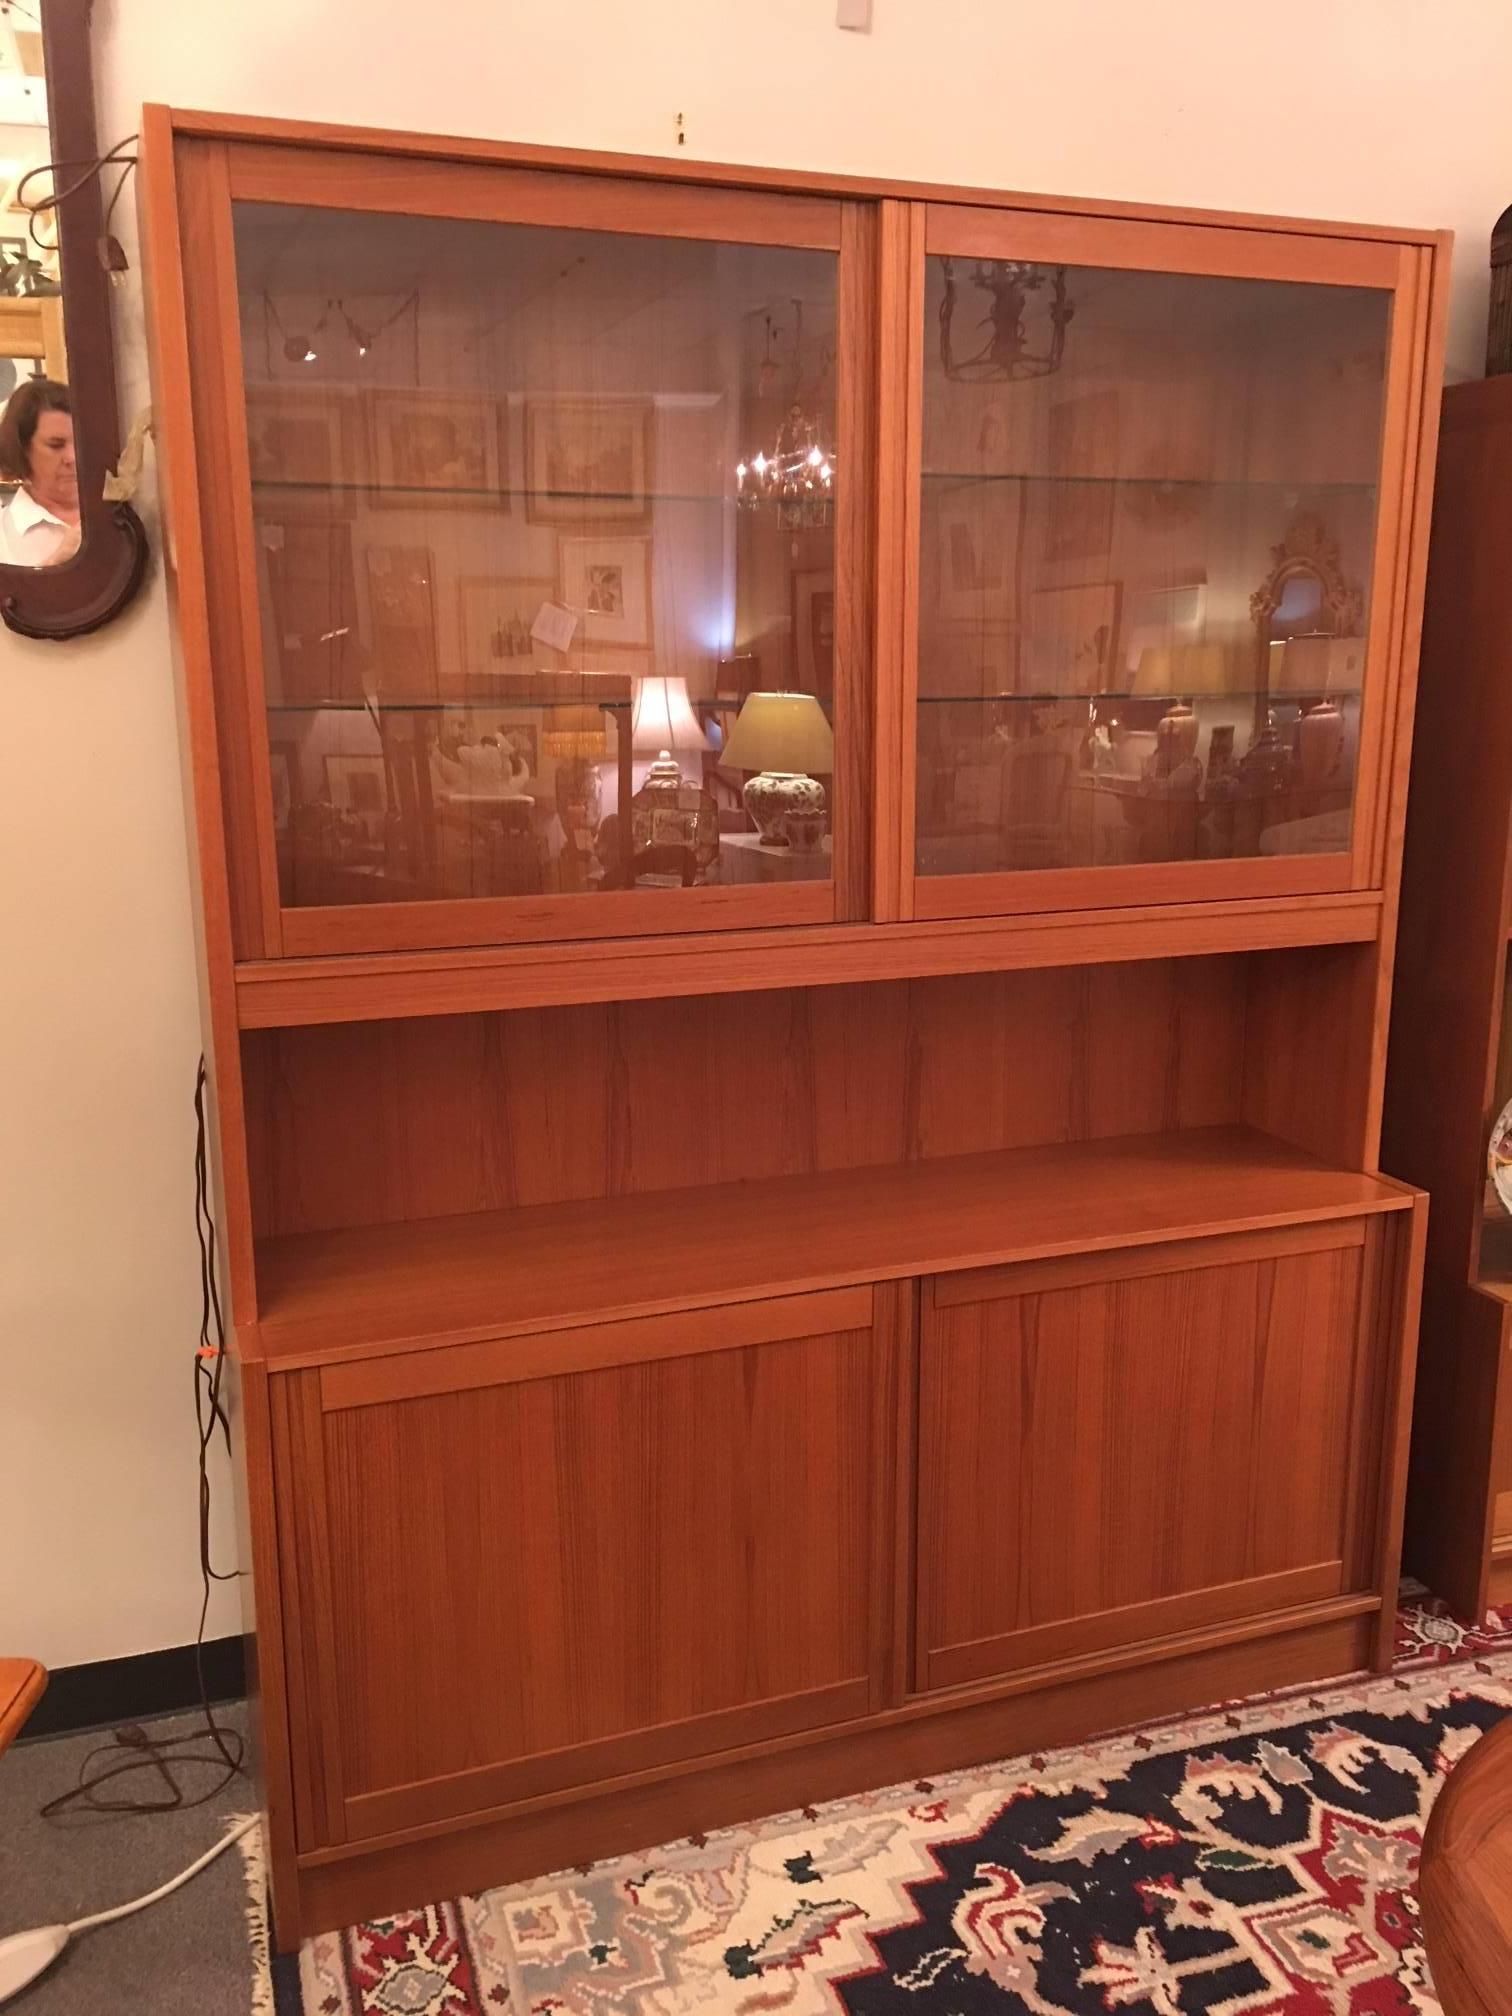 This sweet MCM cabinet can serve as a china cabinet, a library cabinet, a curio cabinet or whatever other use you find for it. It is in excellent condition. Sliding doors, interior shelves, interior lighting. The lighting cord needs to be replaced.